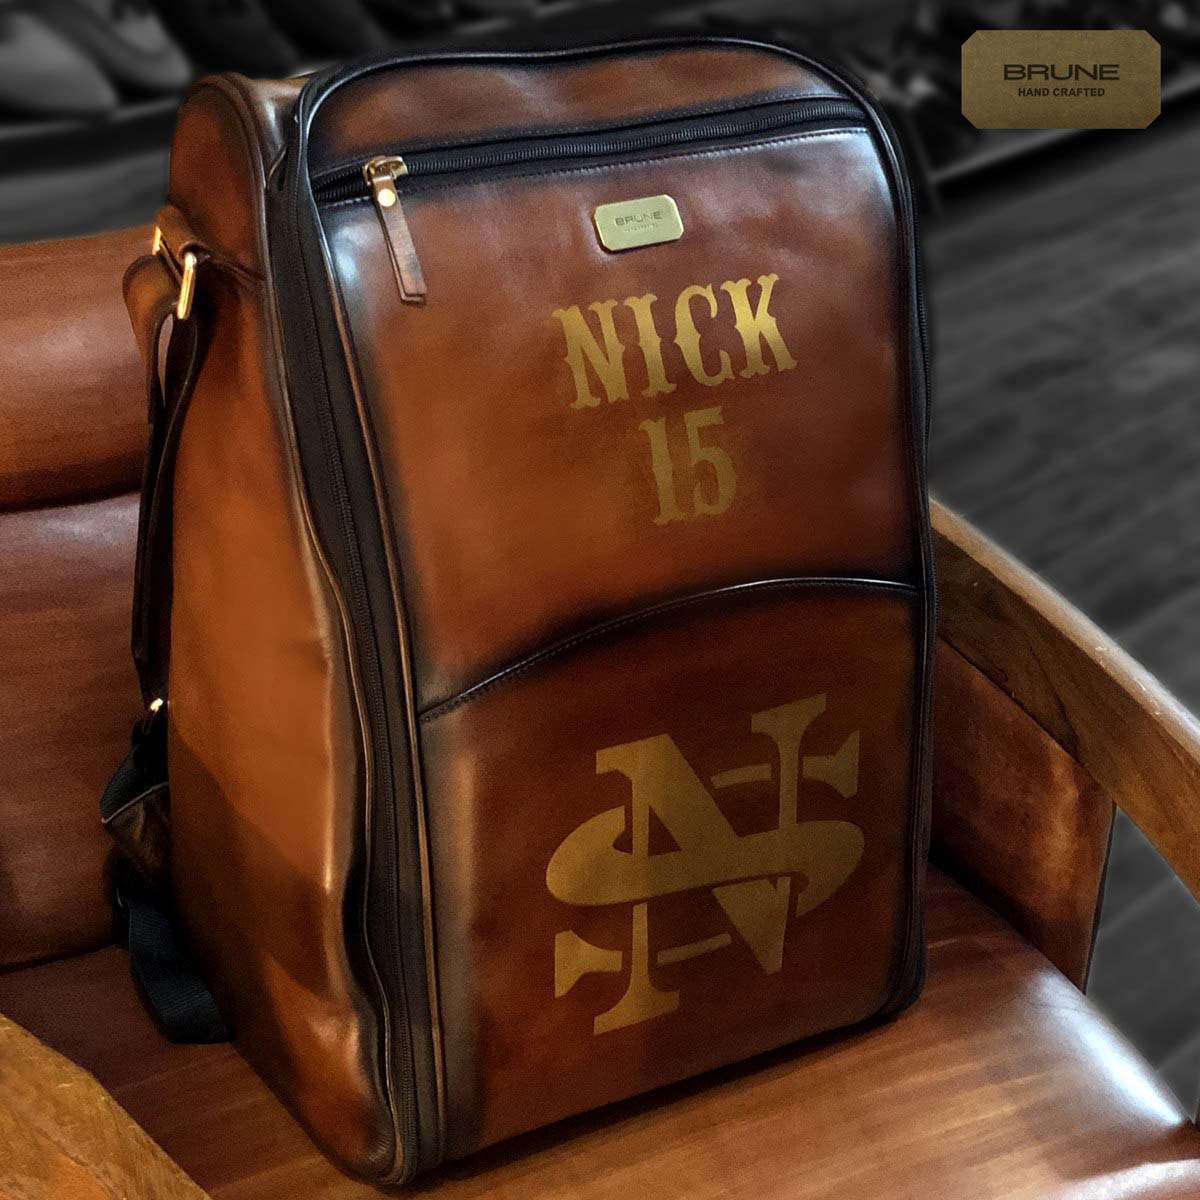 Specially-made Tan Leather Backpack with NICK 15 Name Initials by Brune & Bareskin